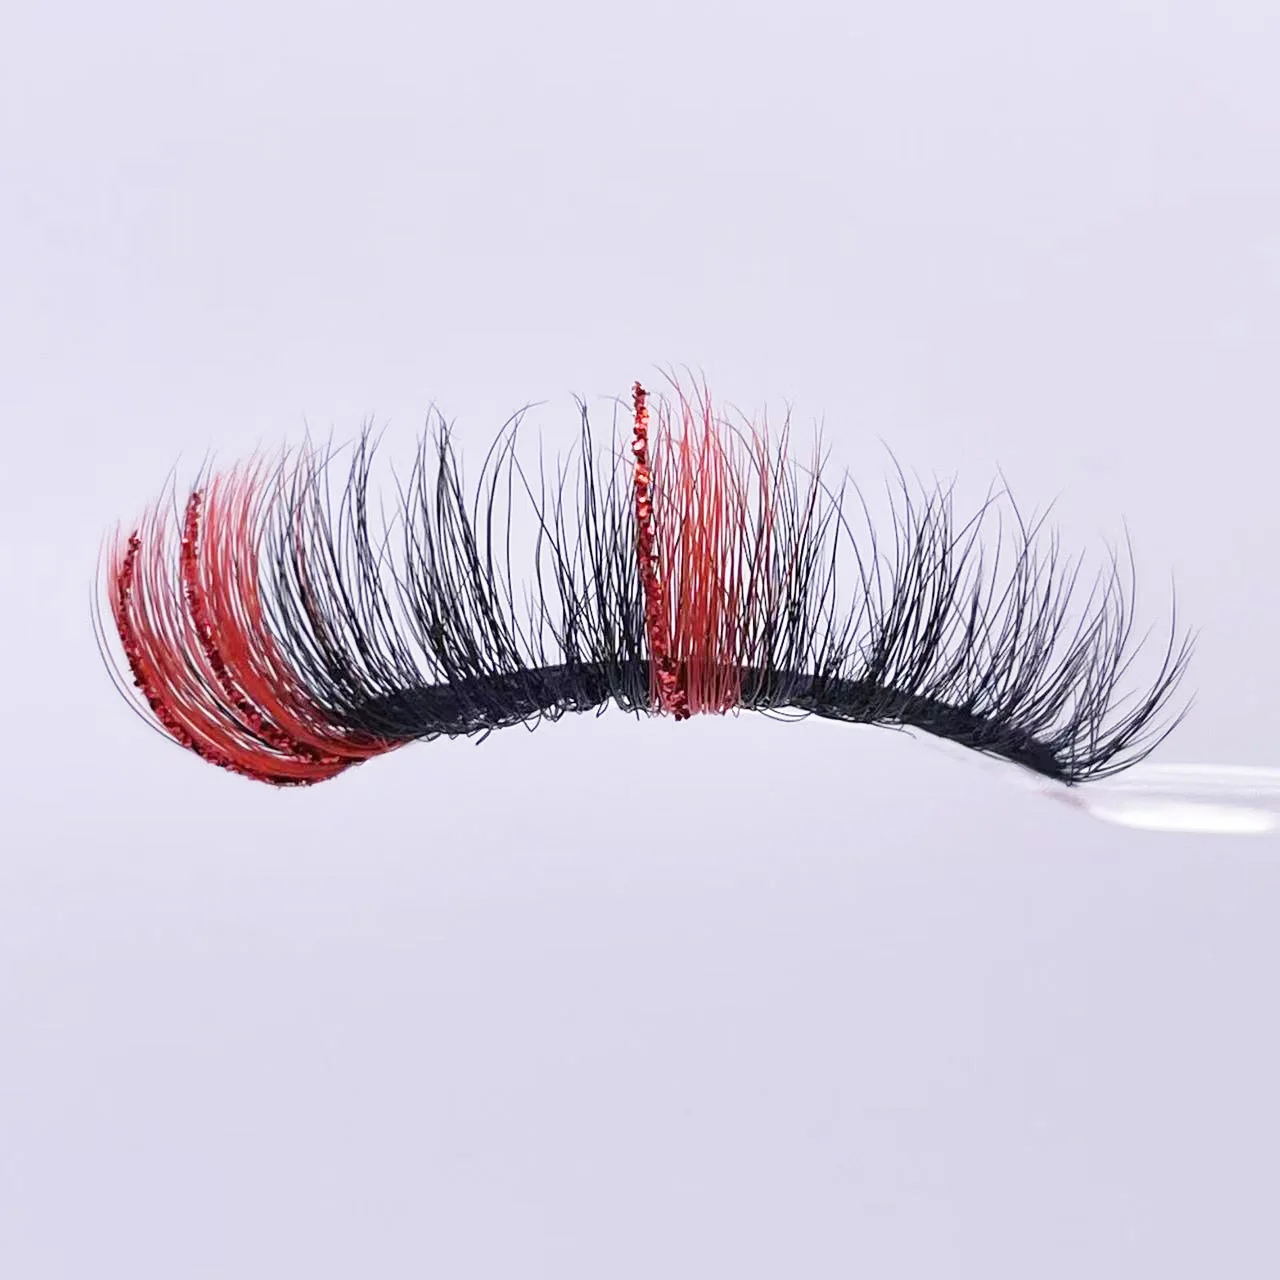 Hbzgtlad Colored Lashes Glitter Mink 15mm -20mm Fluffy Color Streaks Cosplay Makeup Beauty Eyelashes -Outlet Maid Outfit Store S865df7d0870e4f86a6cfed6260f0da0bU.jpg